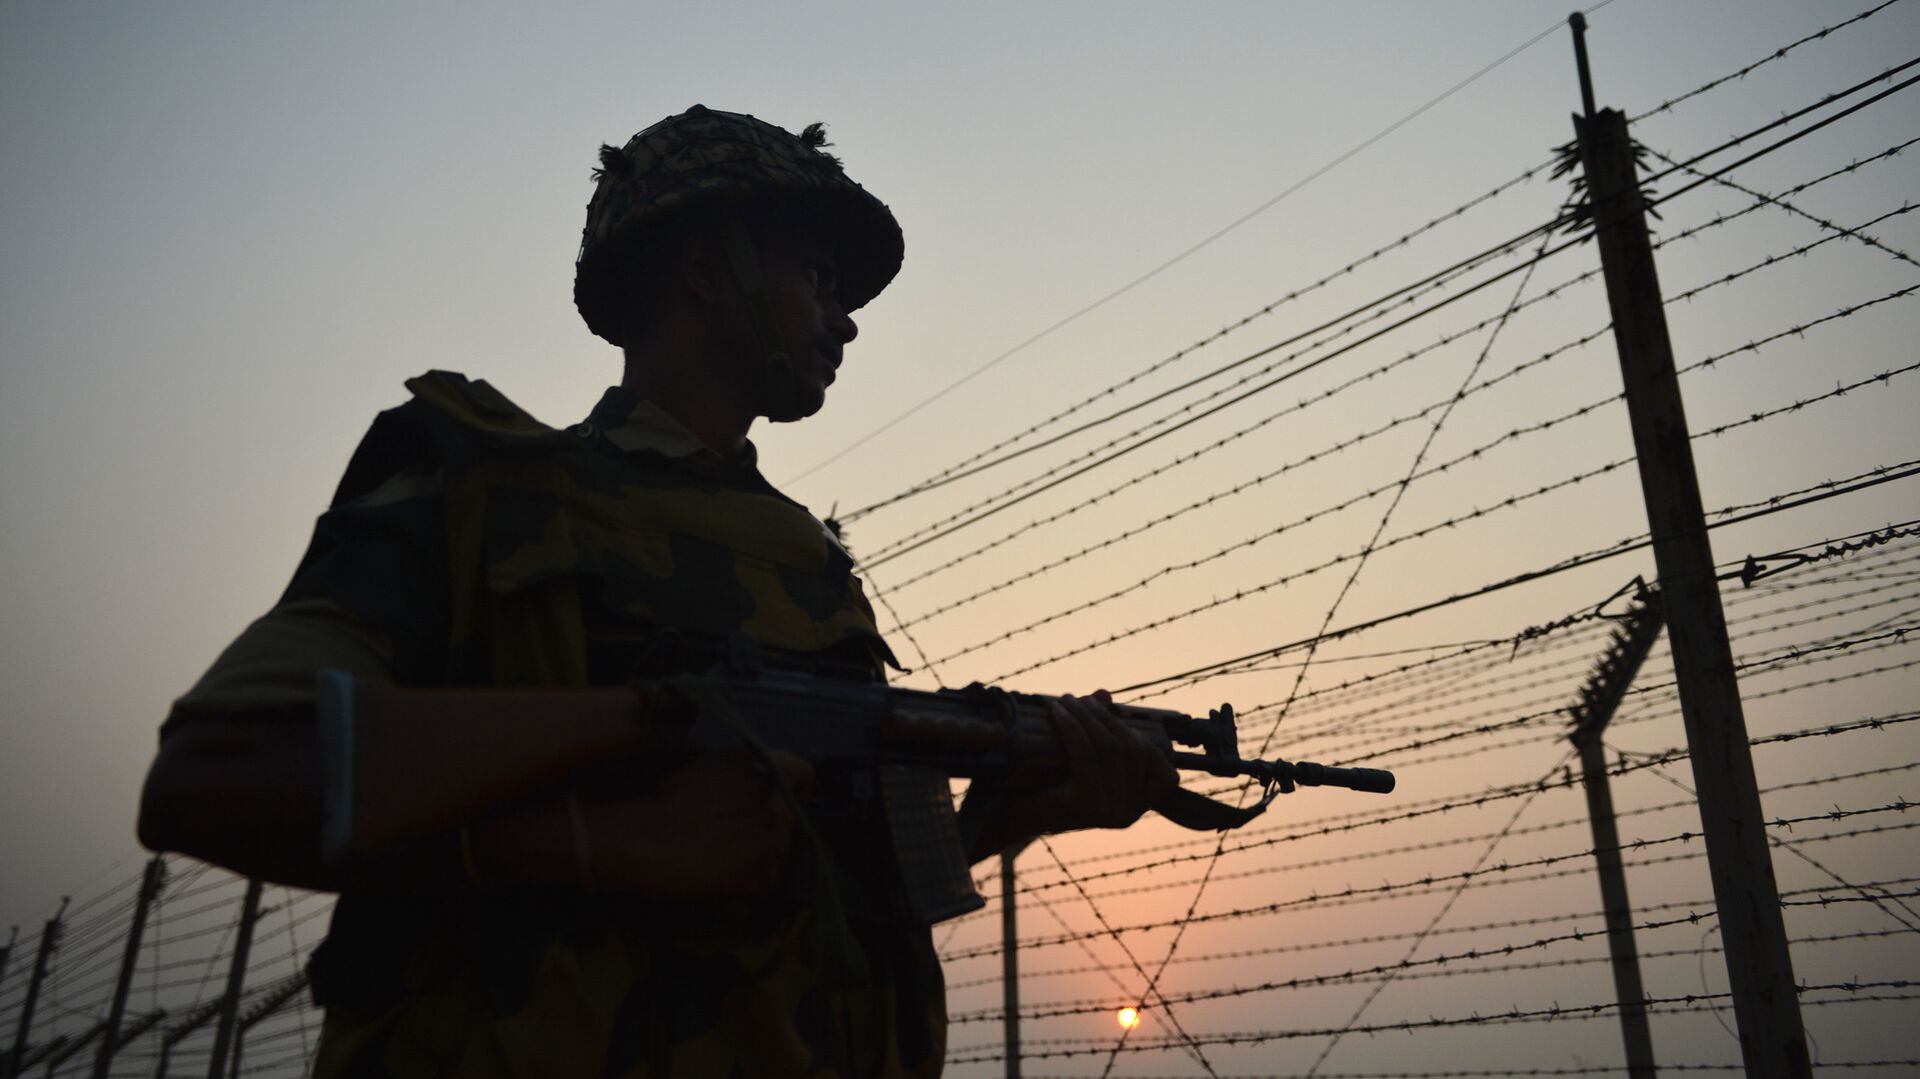 An Indian Border Security Force (BSF) soldier patrols along a fence at the India-Pakistan border in R.S Pora, southwest of Jammu, on October 3, 2016 - اسپوتنیک افغانستان  , 1920, 06.02.2022